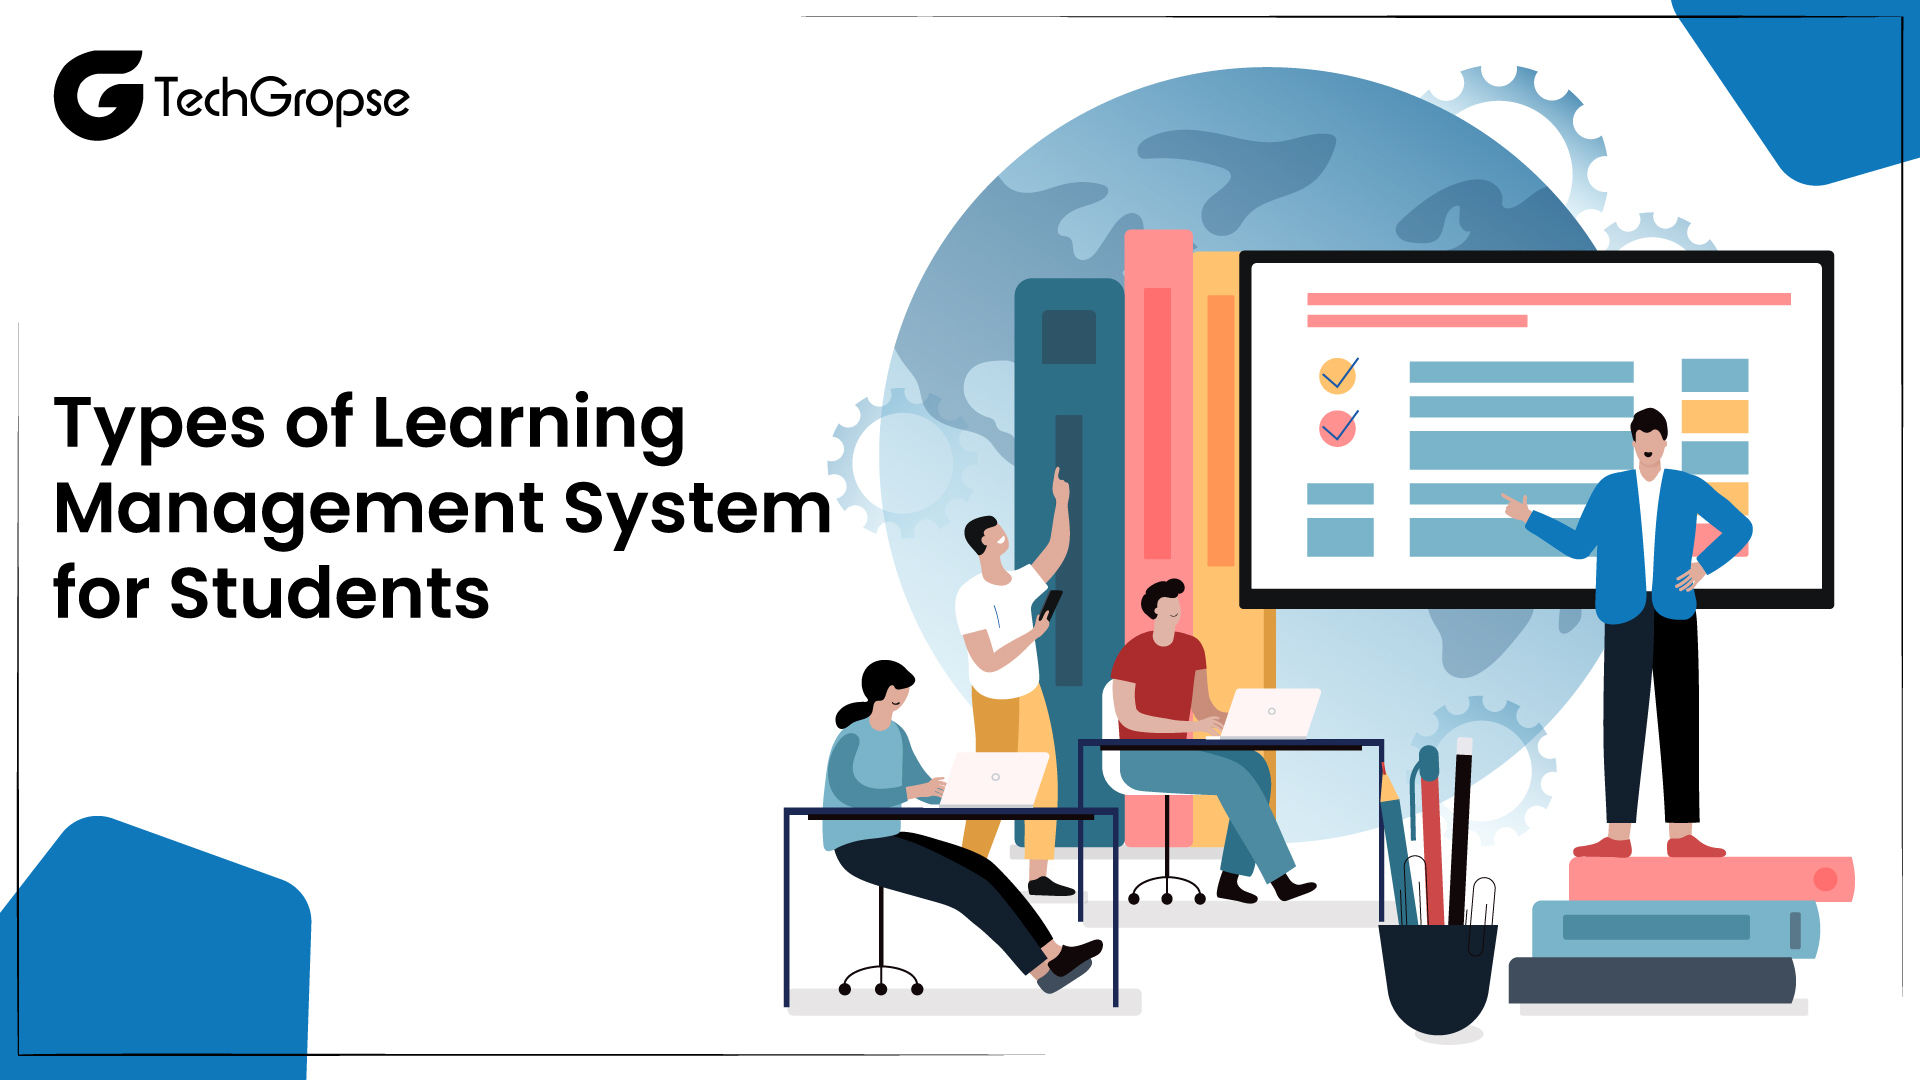 Types of Learning Management System for Students